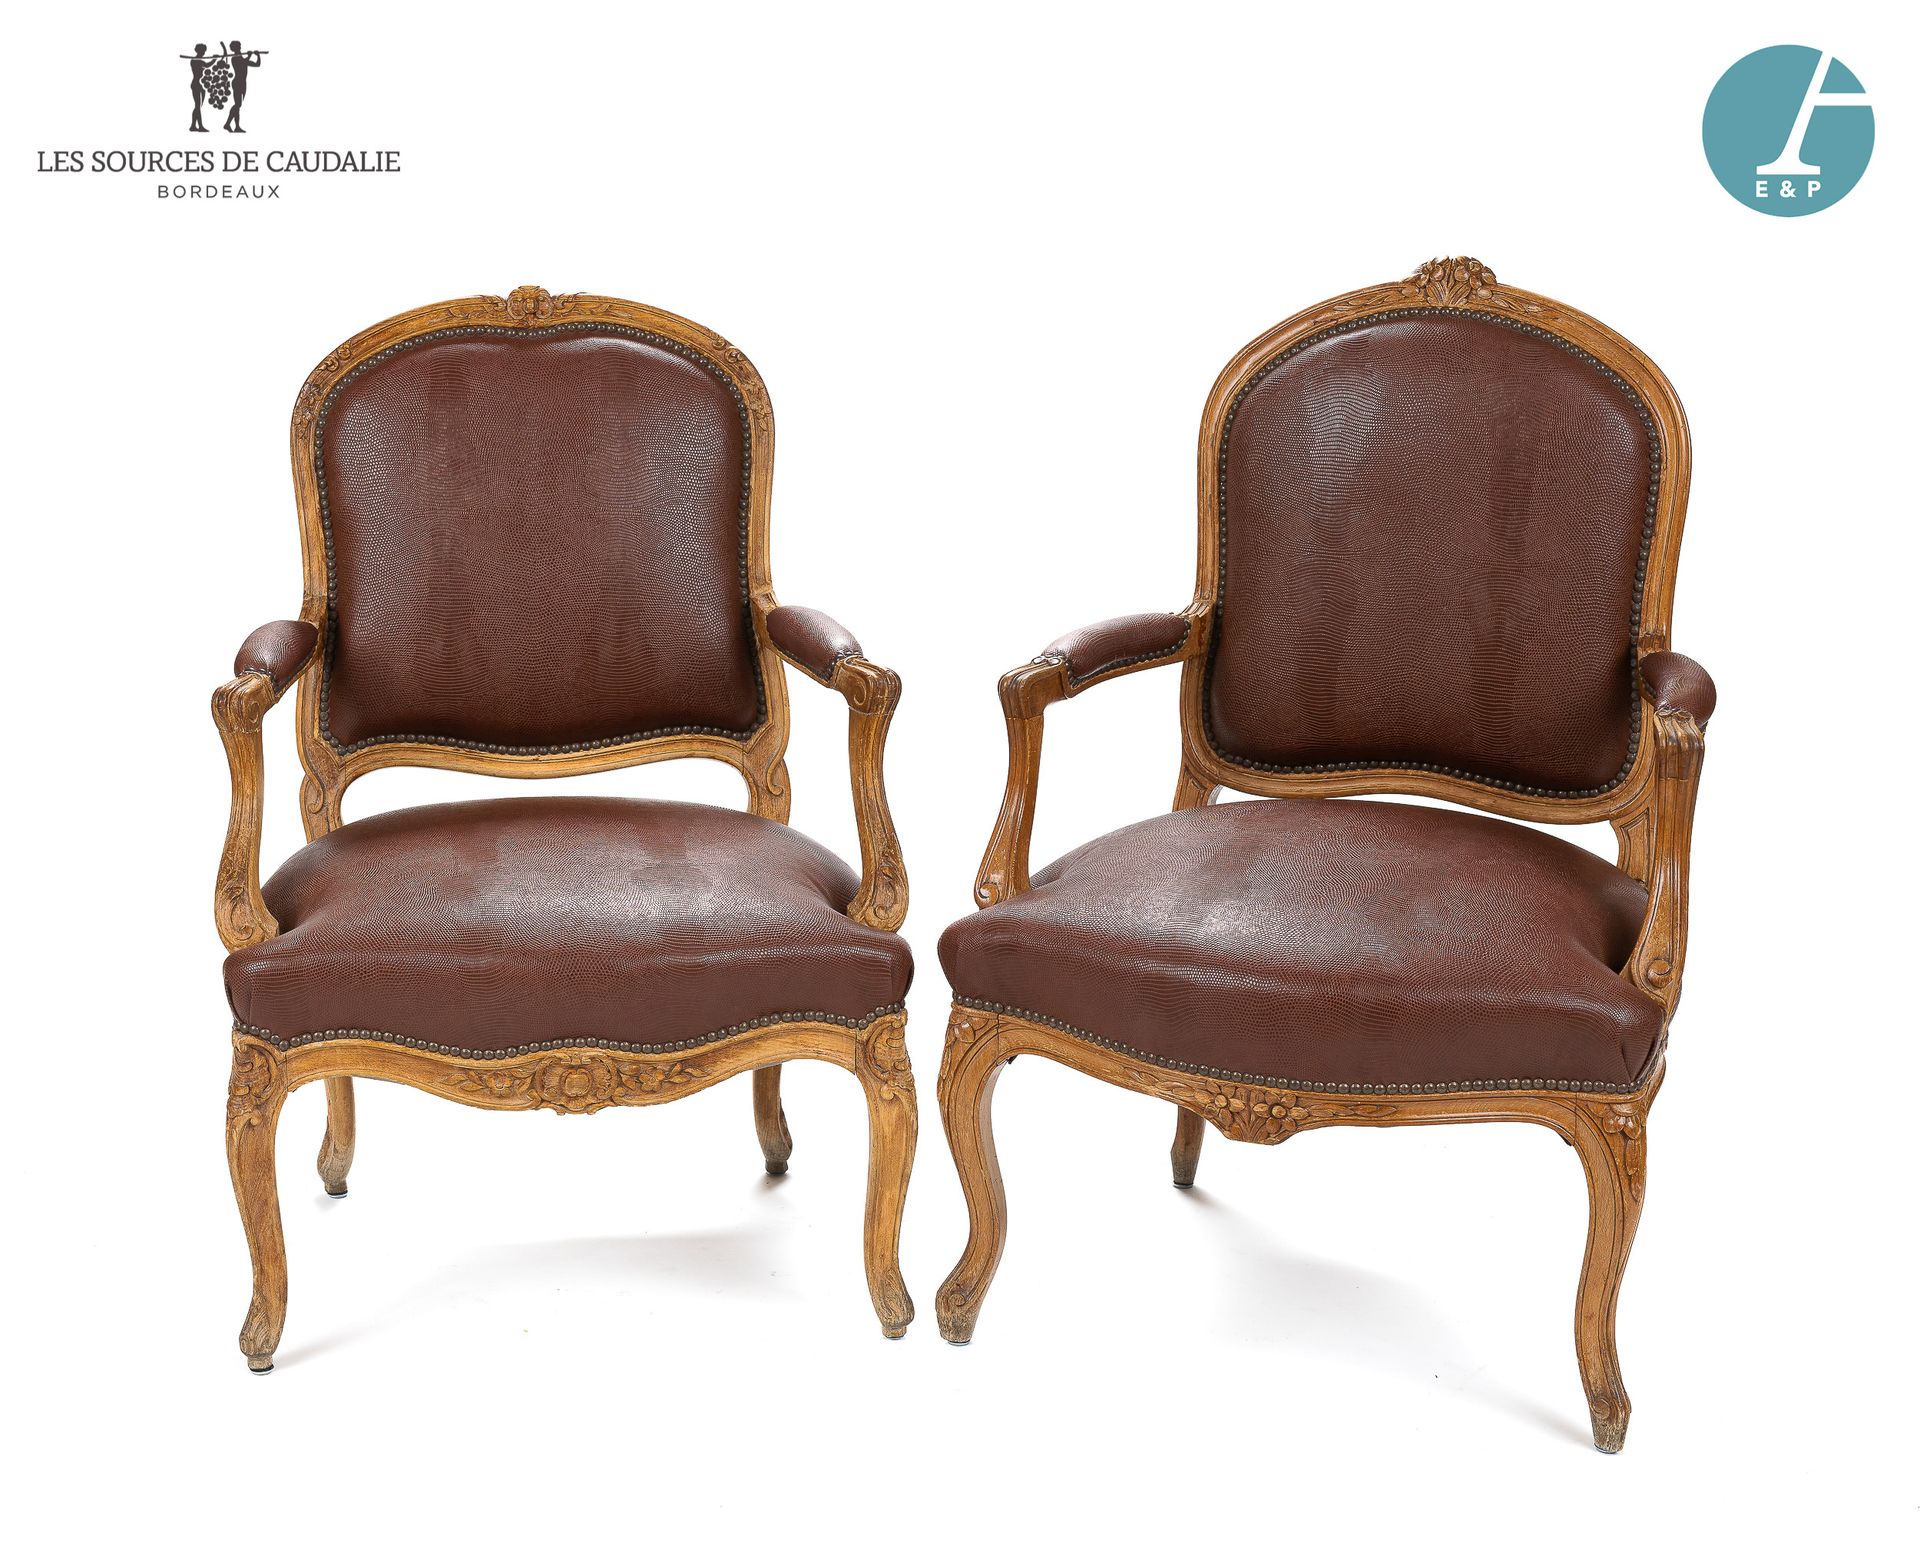 Null From the lobby

Pair of molded and carved natural wood armchairs, khaki gre&hellip;